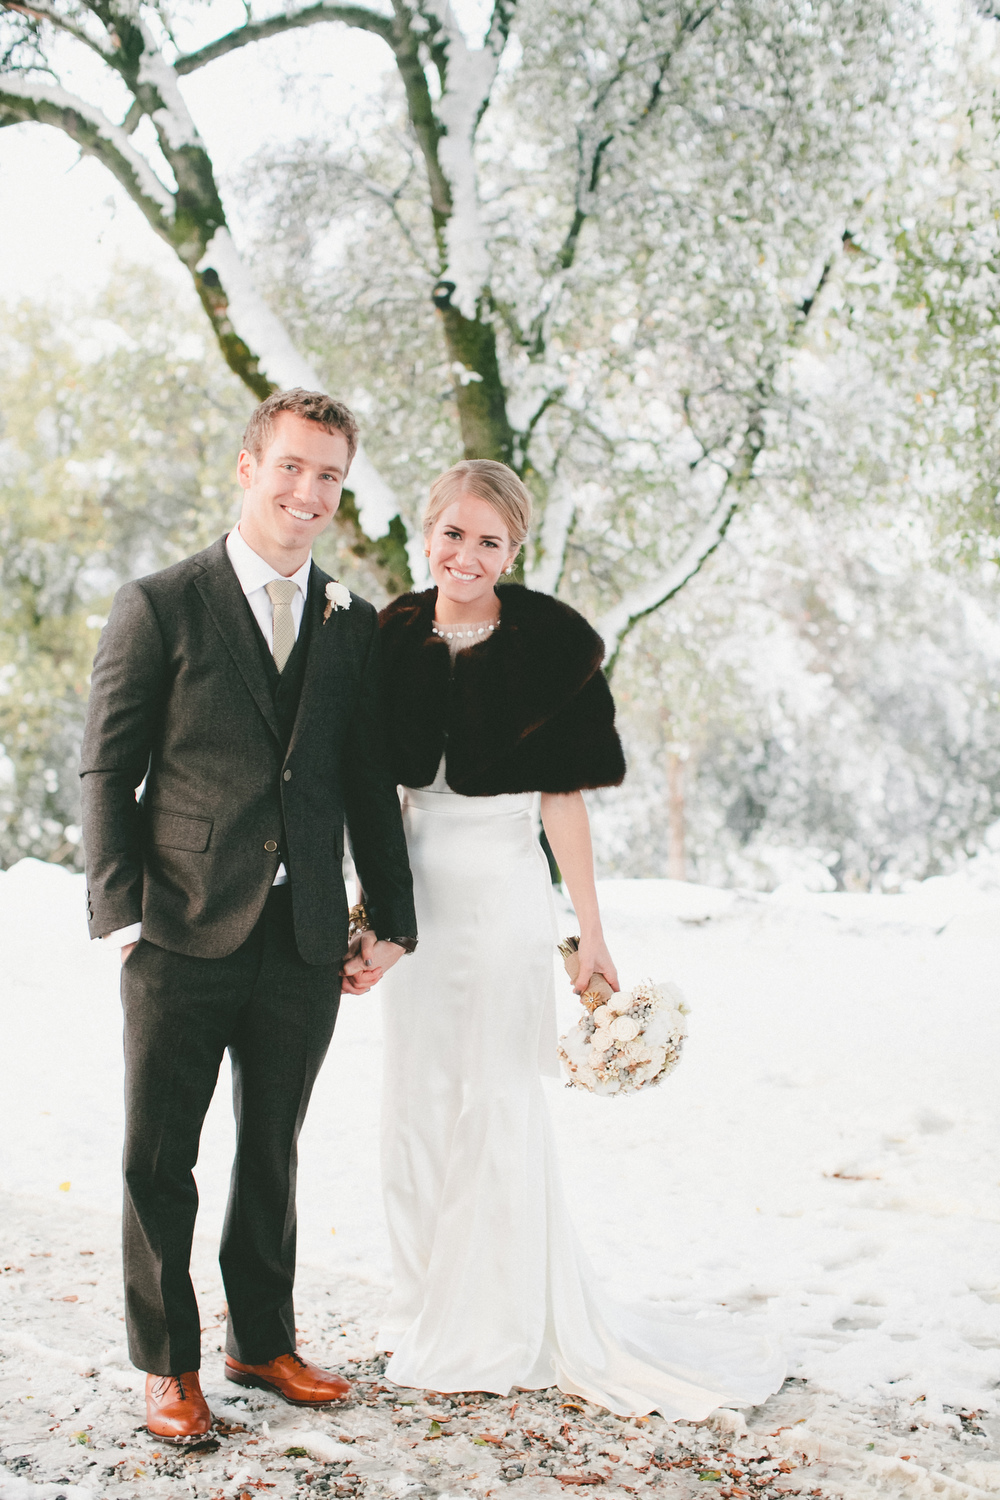 A Vintage Fur Cape for a Romantic Winter Wedding in the Snow